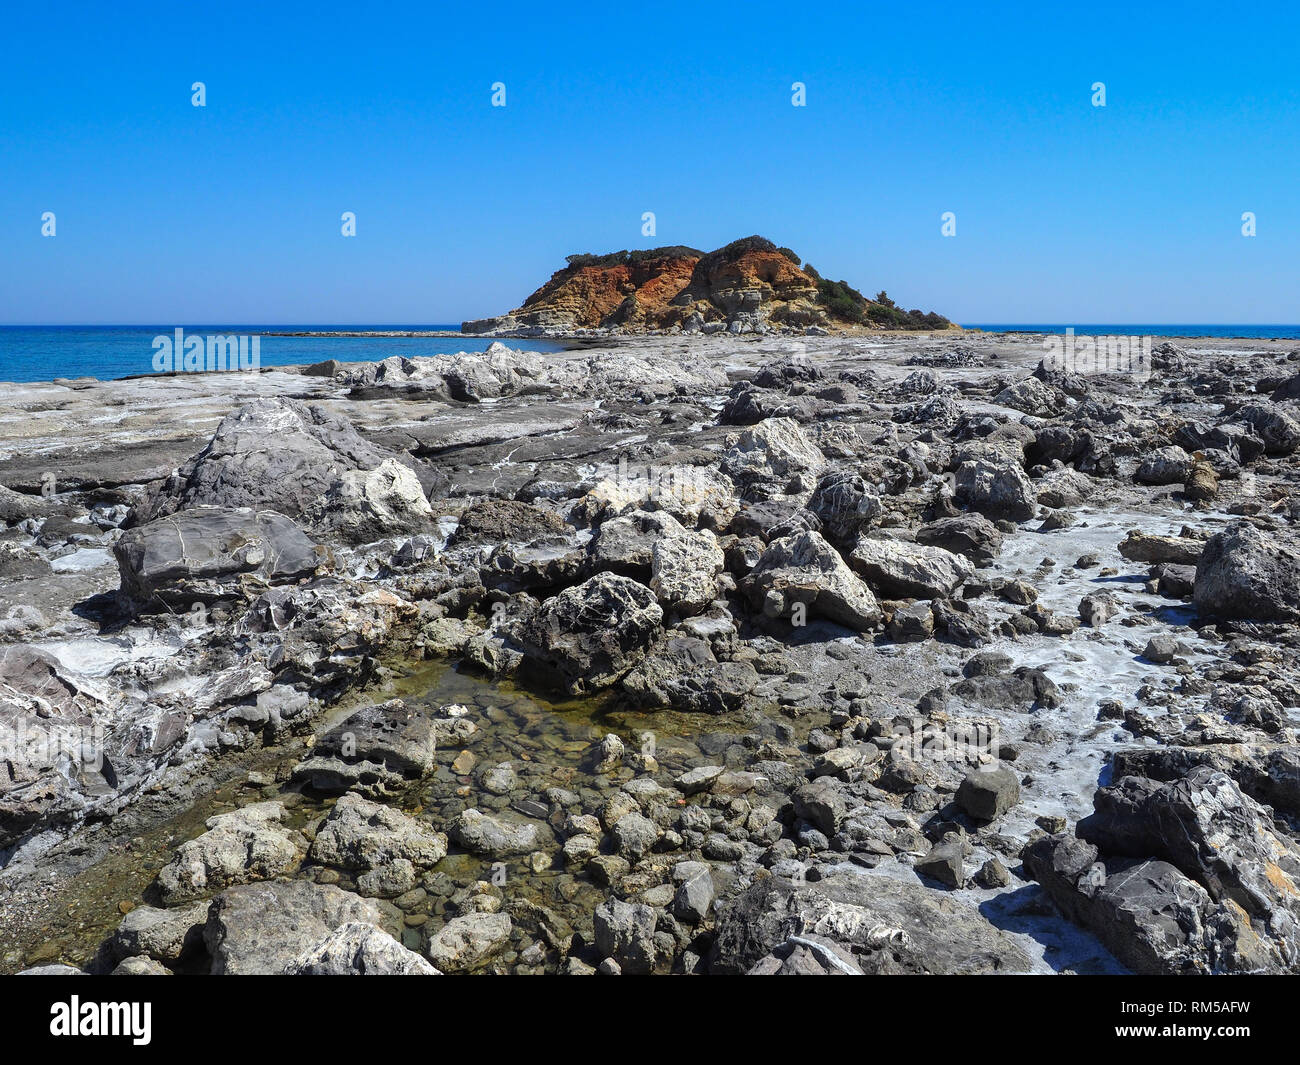 Wonderful beauty wild beach with stony rocky shore and in the distance visible colorful hill near the Kiotari, Rhodes Island, Greece.Beautiful scenery Stock Photo